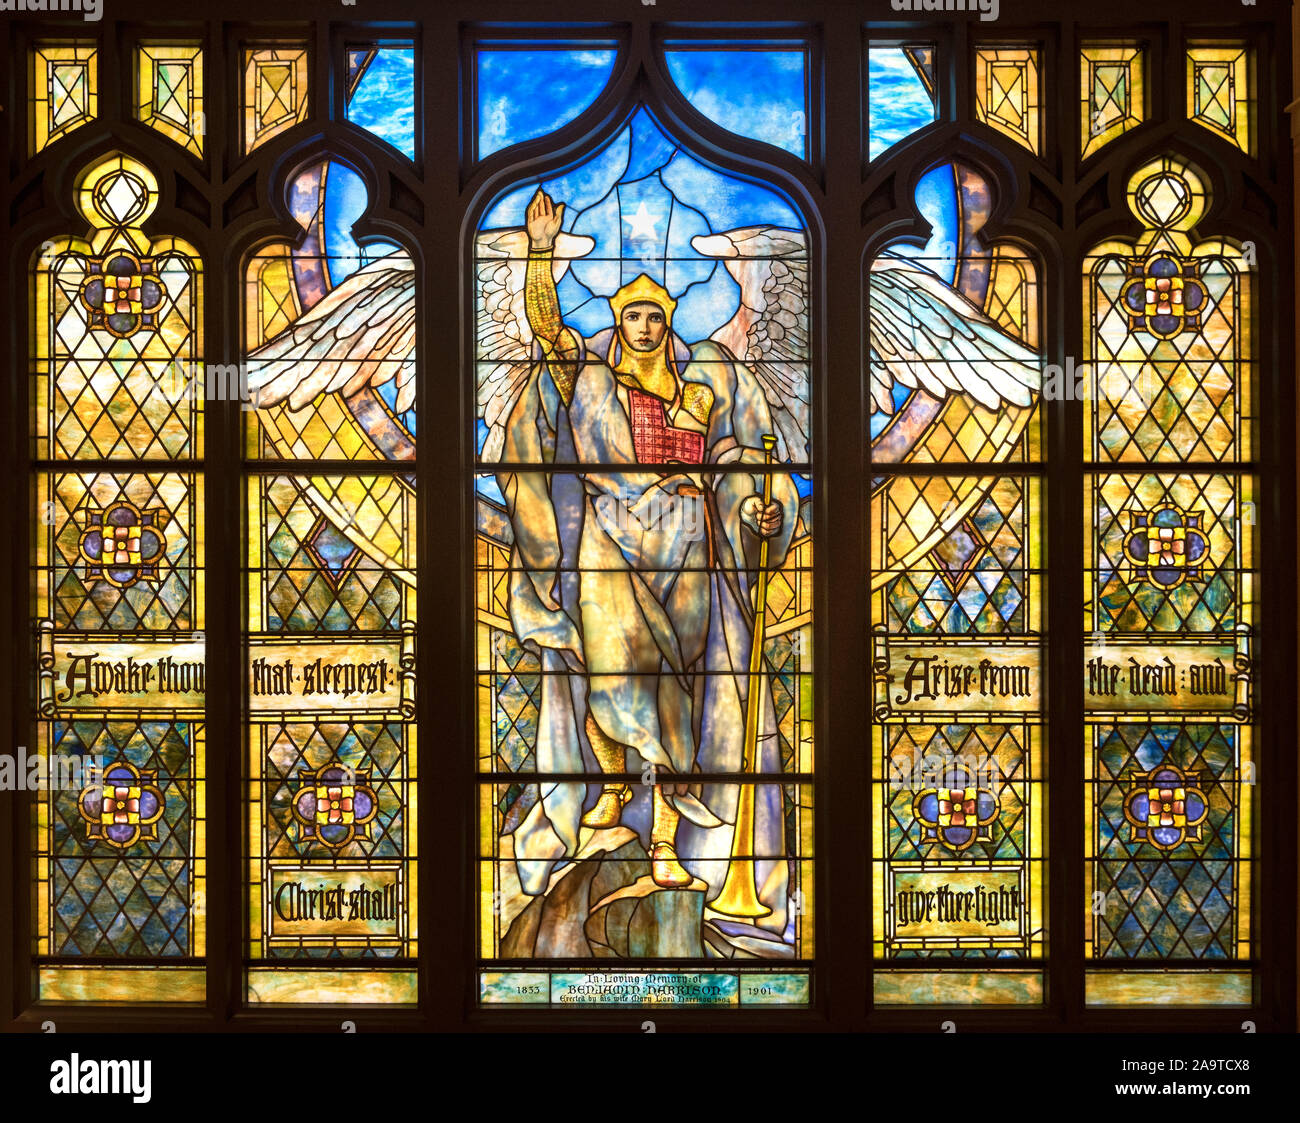 Angel of the Resurrection stained glass window by Frederick Wilson (Designer) and Tiffany Studios, 1903/4. Indianapolis Museum of Art, Indiana, USA Stock Photo